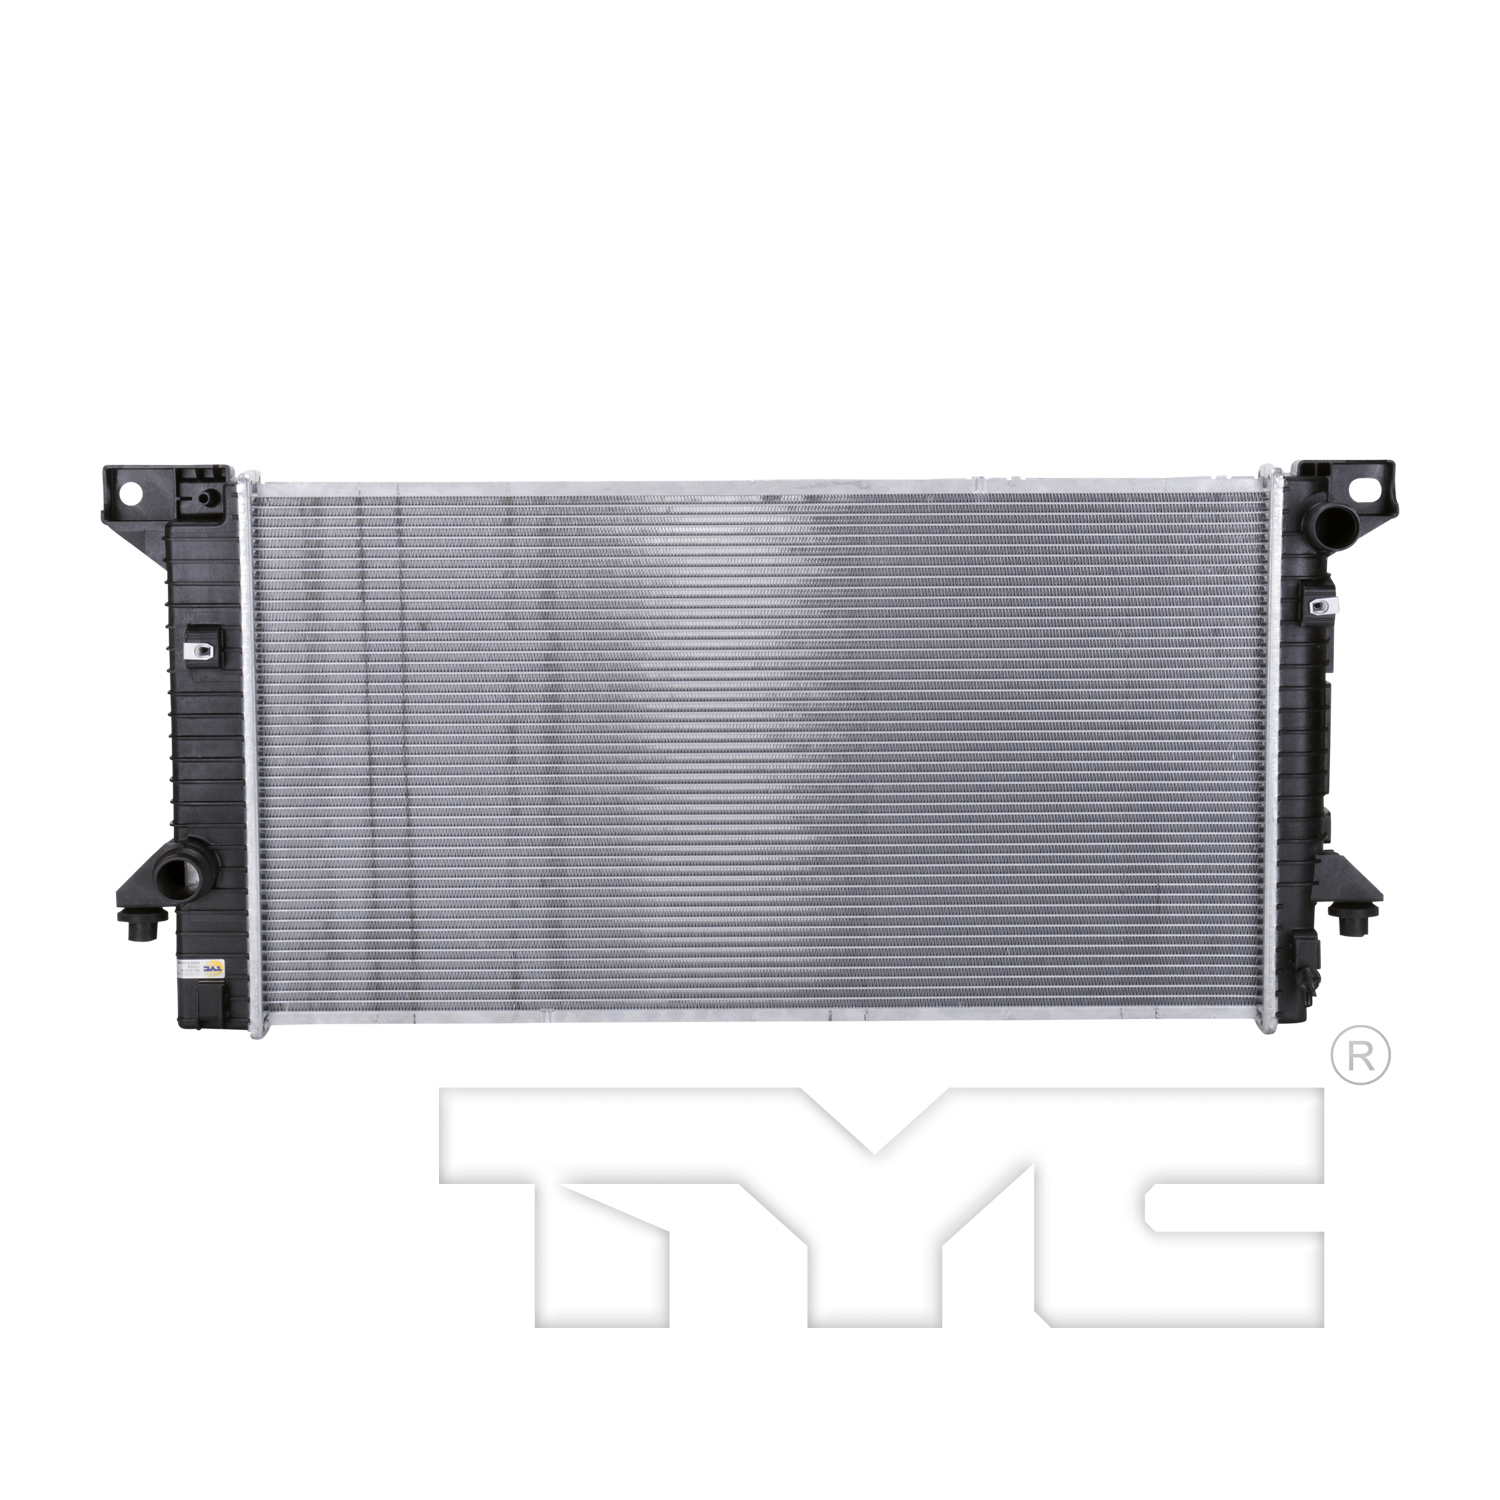 Aftermarket RADIATORS for FORD - F-150, F-150,11-13,Radiator assembly